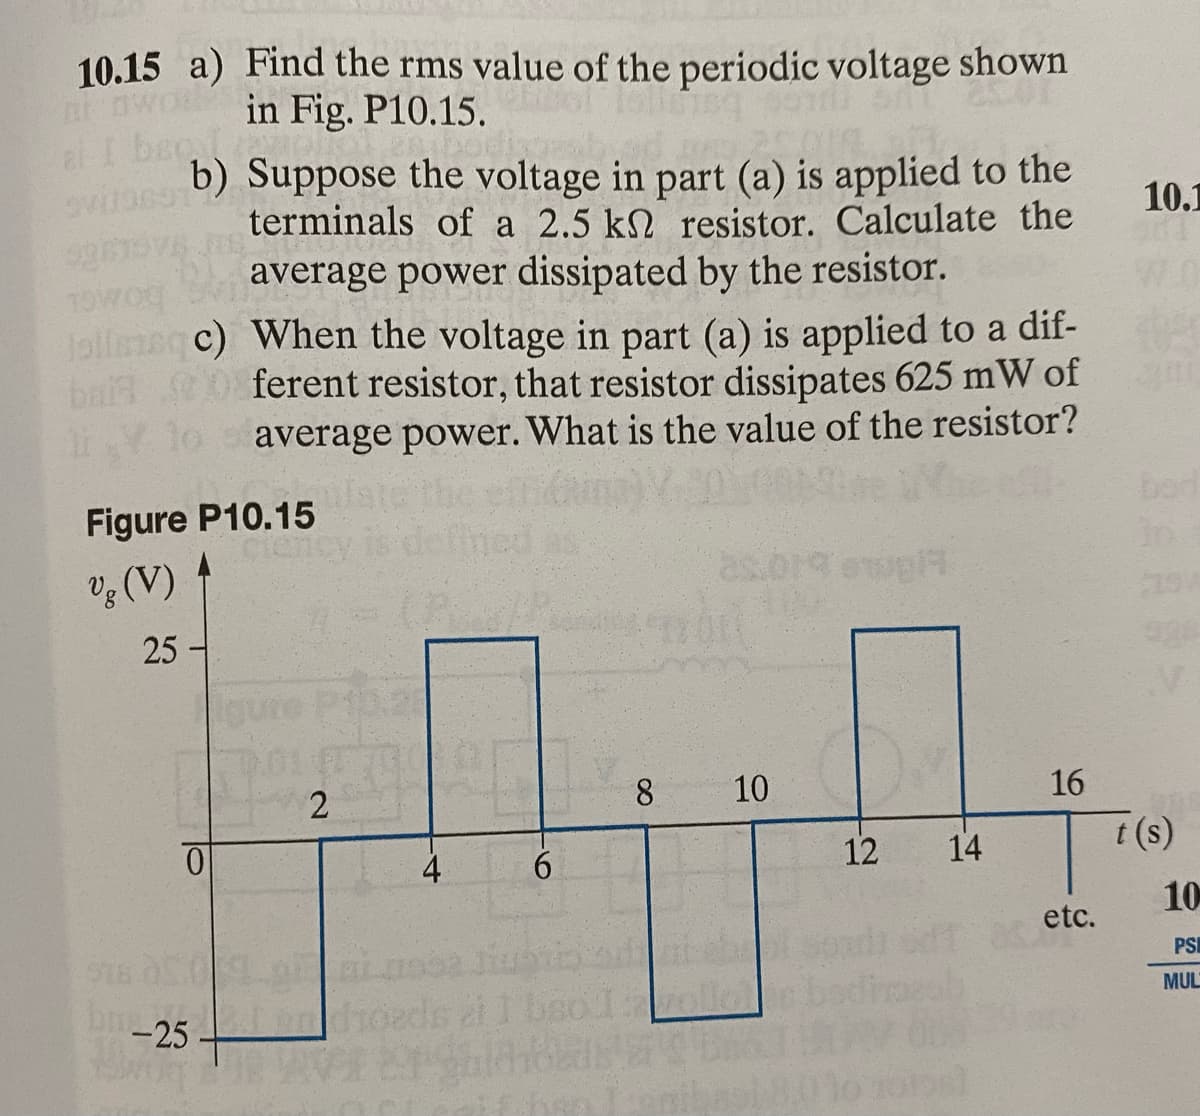 10.15 a) Find the rms value of the periodic voltage shown
two in Fig. P10.15.
al I beg
ovito691
b) Suppose the voltage in part (a) is applied to the
terminals of a 2.5 k resistor. Calculate the
average power dissipated by the resistor.
TOWO
Jollmoqc) When the voltage in part (a) is applied to a dif-
bart 0 ferent resistor, that resistor dissipates 625 mW of
average power. What is the value of the resistor?
Figure P10.15
Vg (V)
25-
bug
0
-25 +
2
4
6
8
120
10
#topl7
12
14
16
etc.
10.1
t(s)
10
PSI
MUL